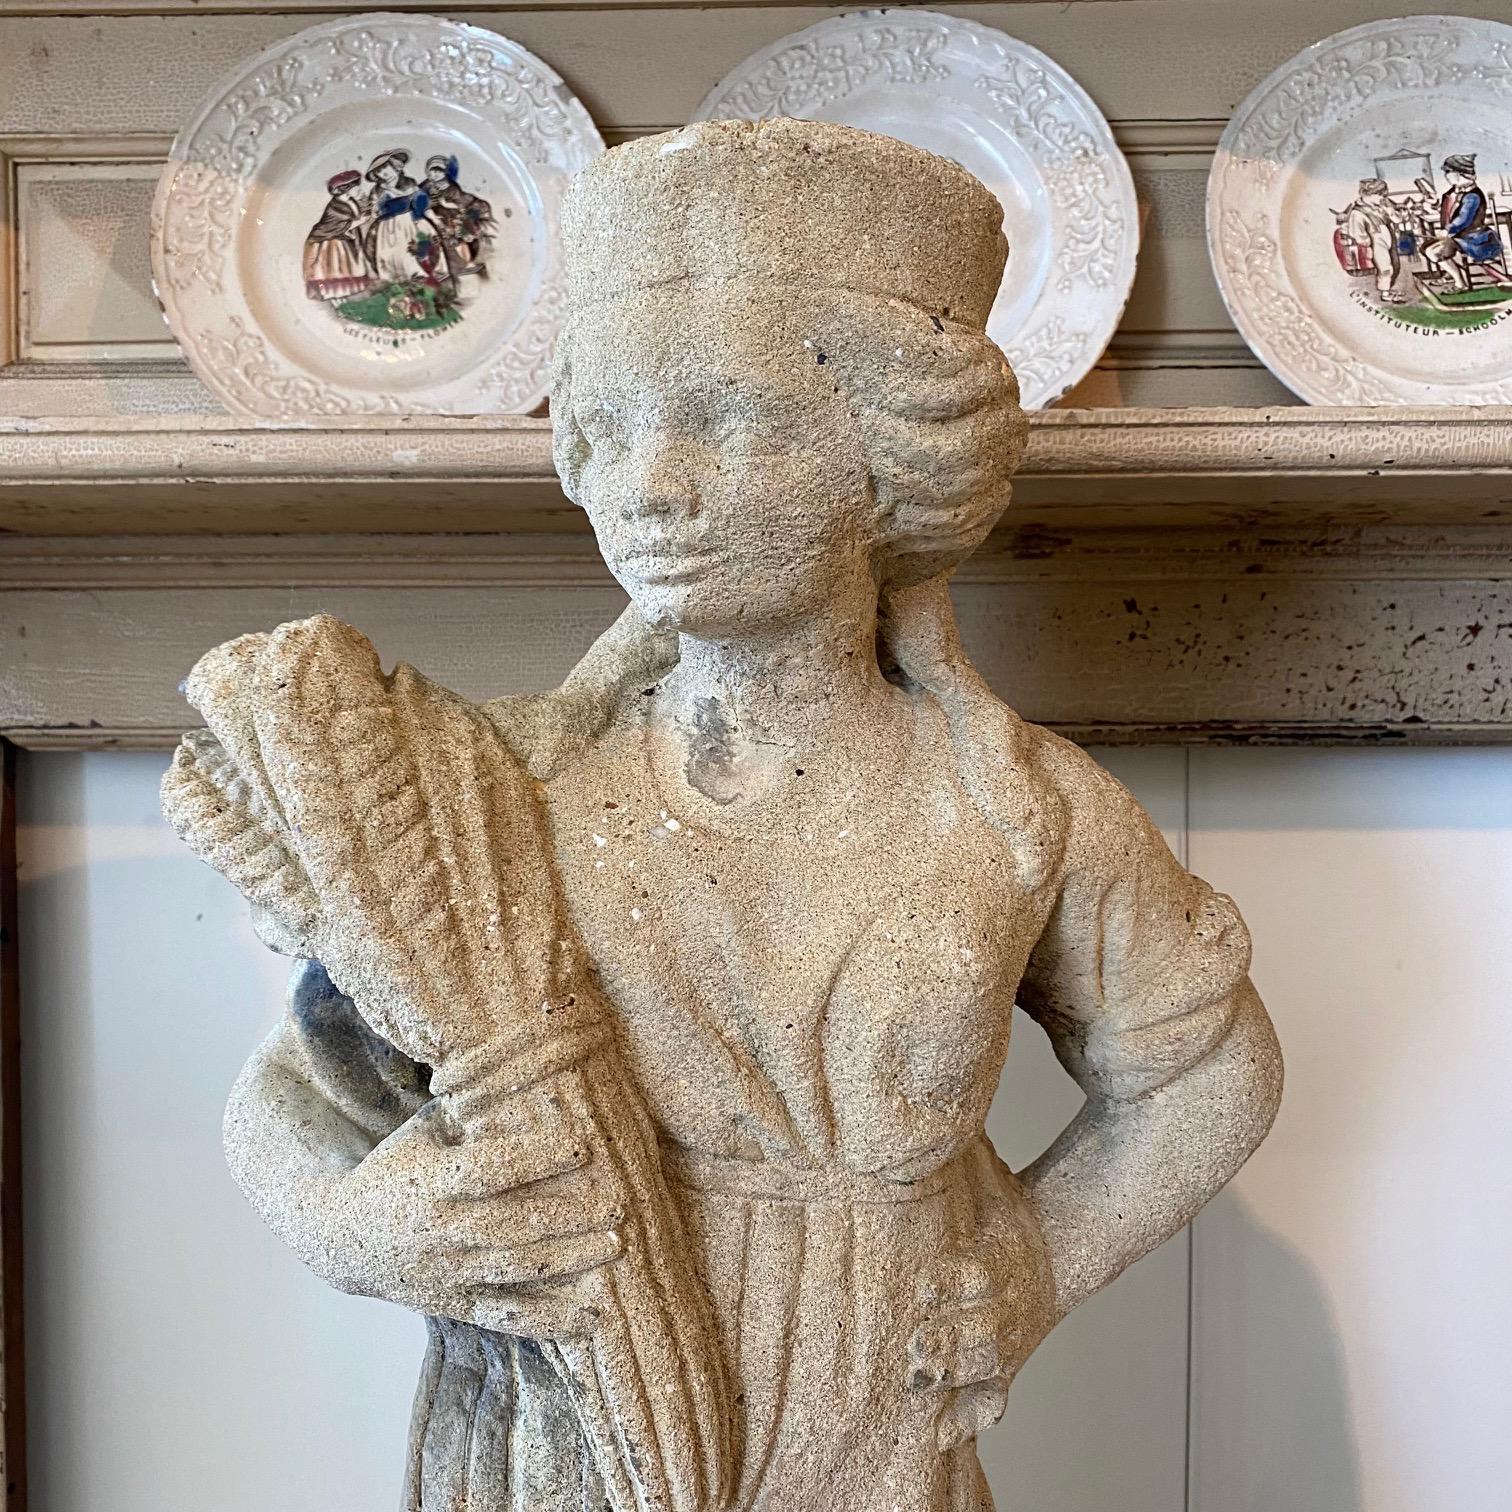 Really lovely pair of cast stone garden statues depicting a young woman or girl holding wheat sheaves and a young boy with asparagus or artichoke at his feet.  An outdoor accent for a garden or landscaping. Weathered patina. Would dress up any